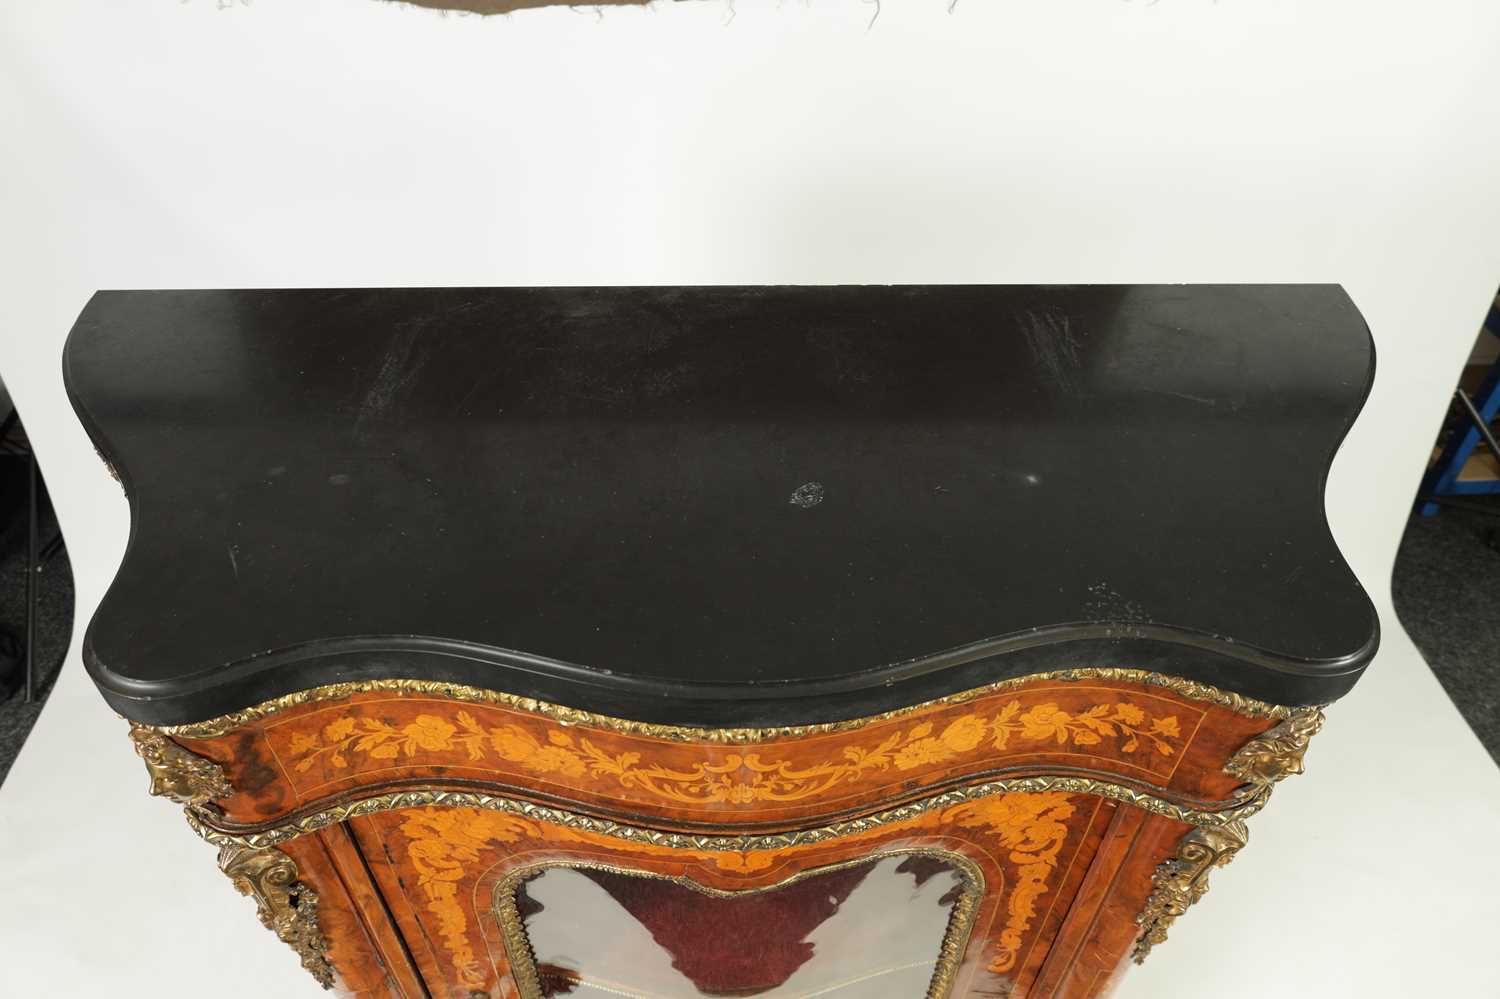 A FINE 19TH CENTURY ORMOLU MOUNTED WALNUT AND FLORAL MARQUETRY INLAID SERPENTINE SIDE CABINET - Image 8 of 16